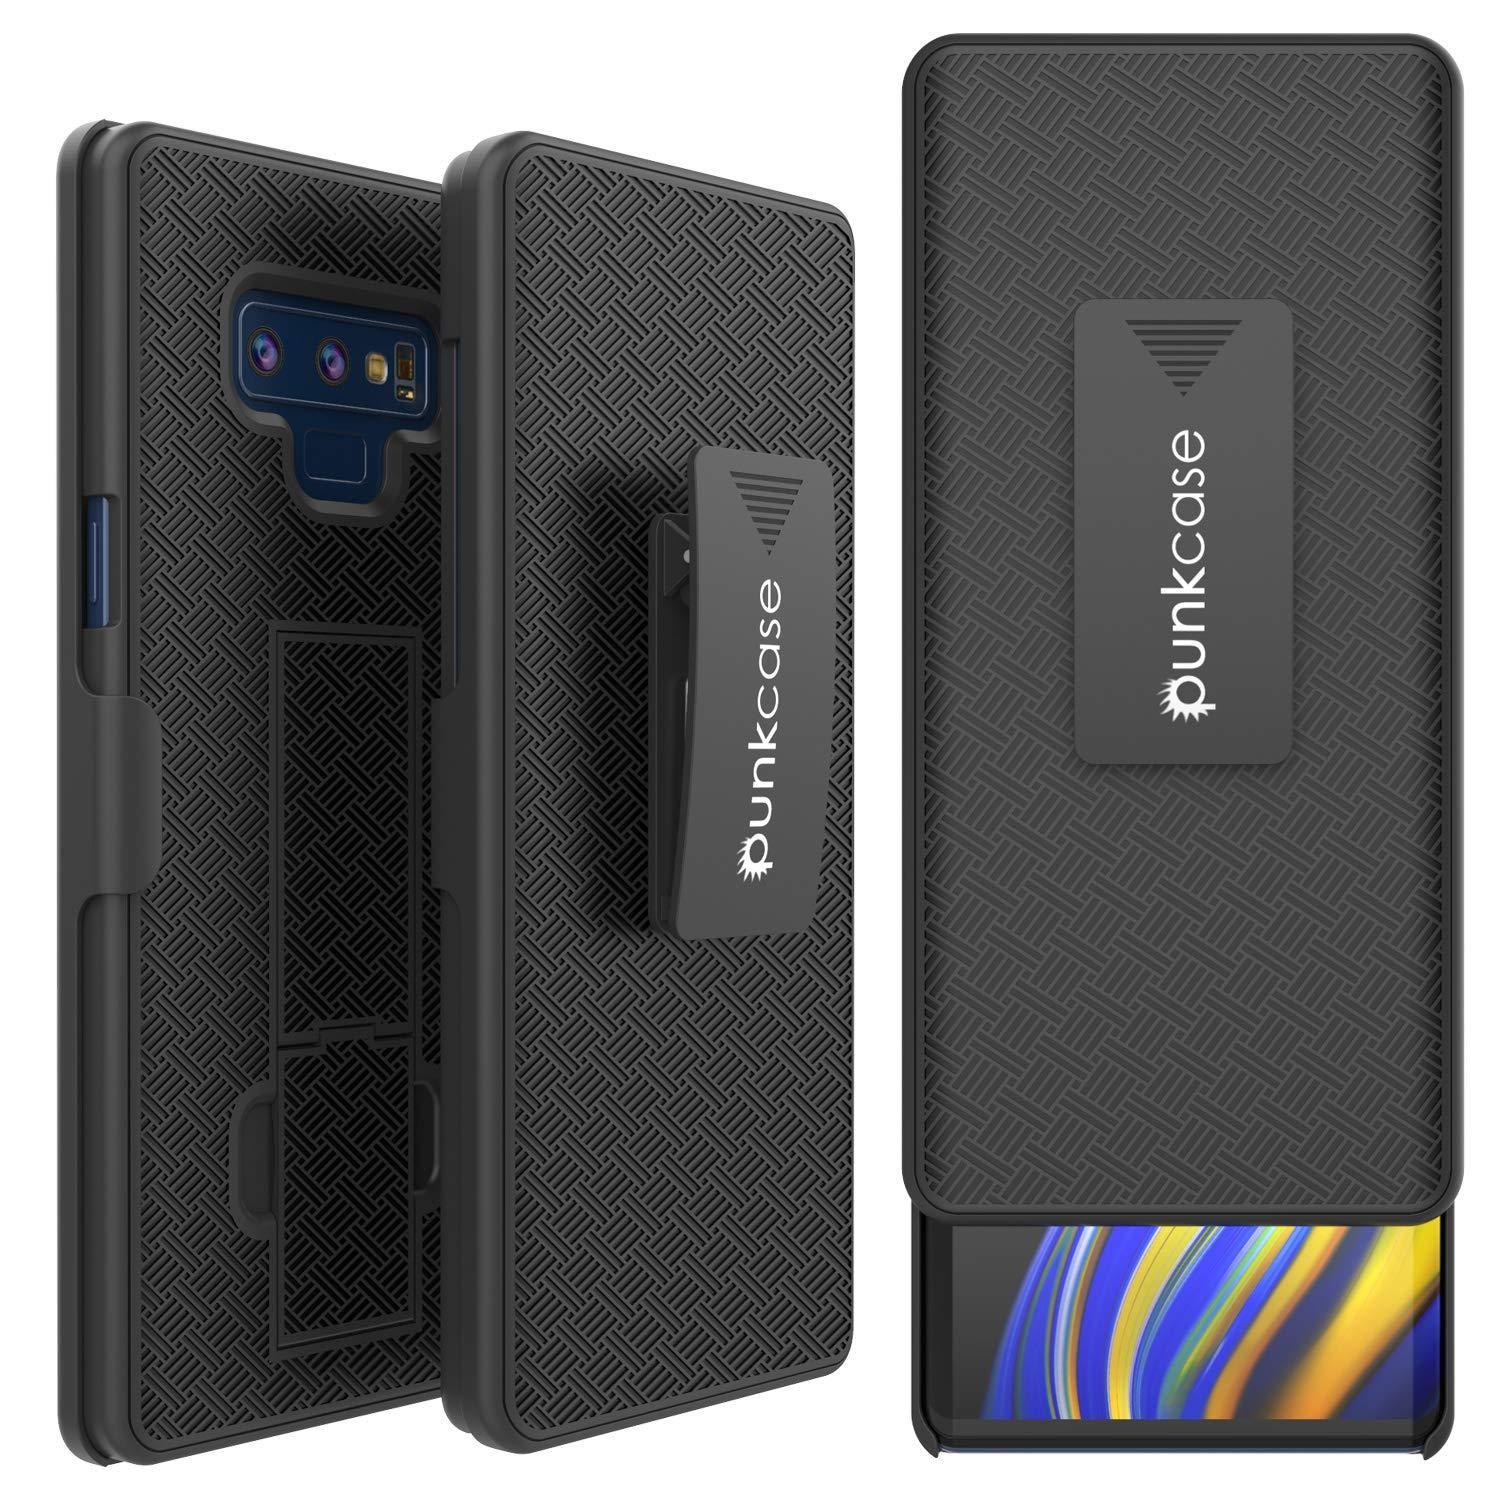 PunkCase Galaxy Note 10+ Plus Case with Screen Protector, Holster Belt Clip & Built-in Kickstand [Black]